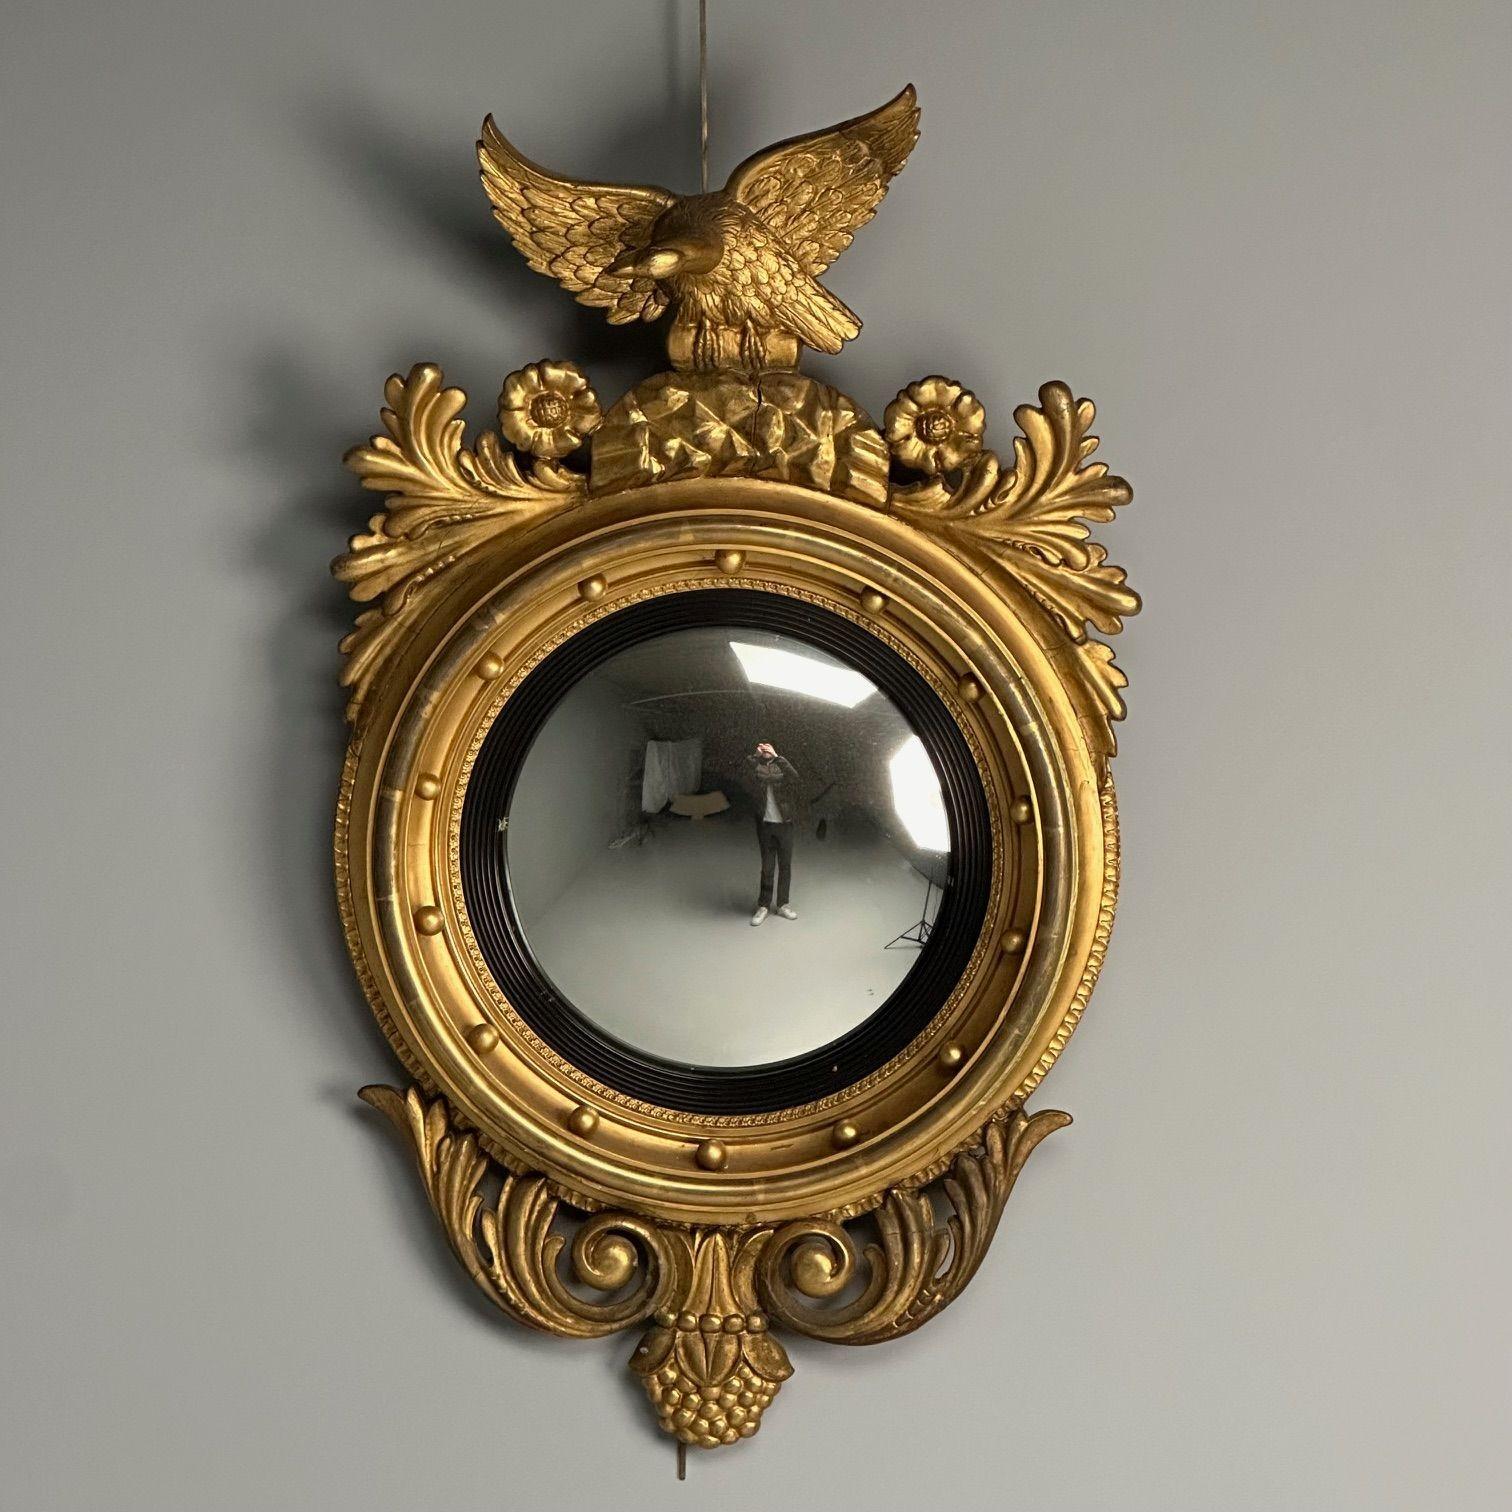 Regency, Circular Convex Wall Mirror, Giltwood, Eagle Motif, USA, 1950s

Finely carved giltwood circular convex mirror plate within an ebonized reeded slip and gilt foliate carved banding within a concave molded frame applied with balls surmounted